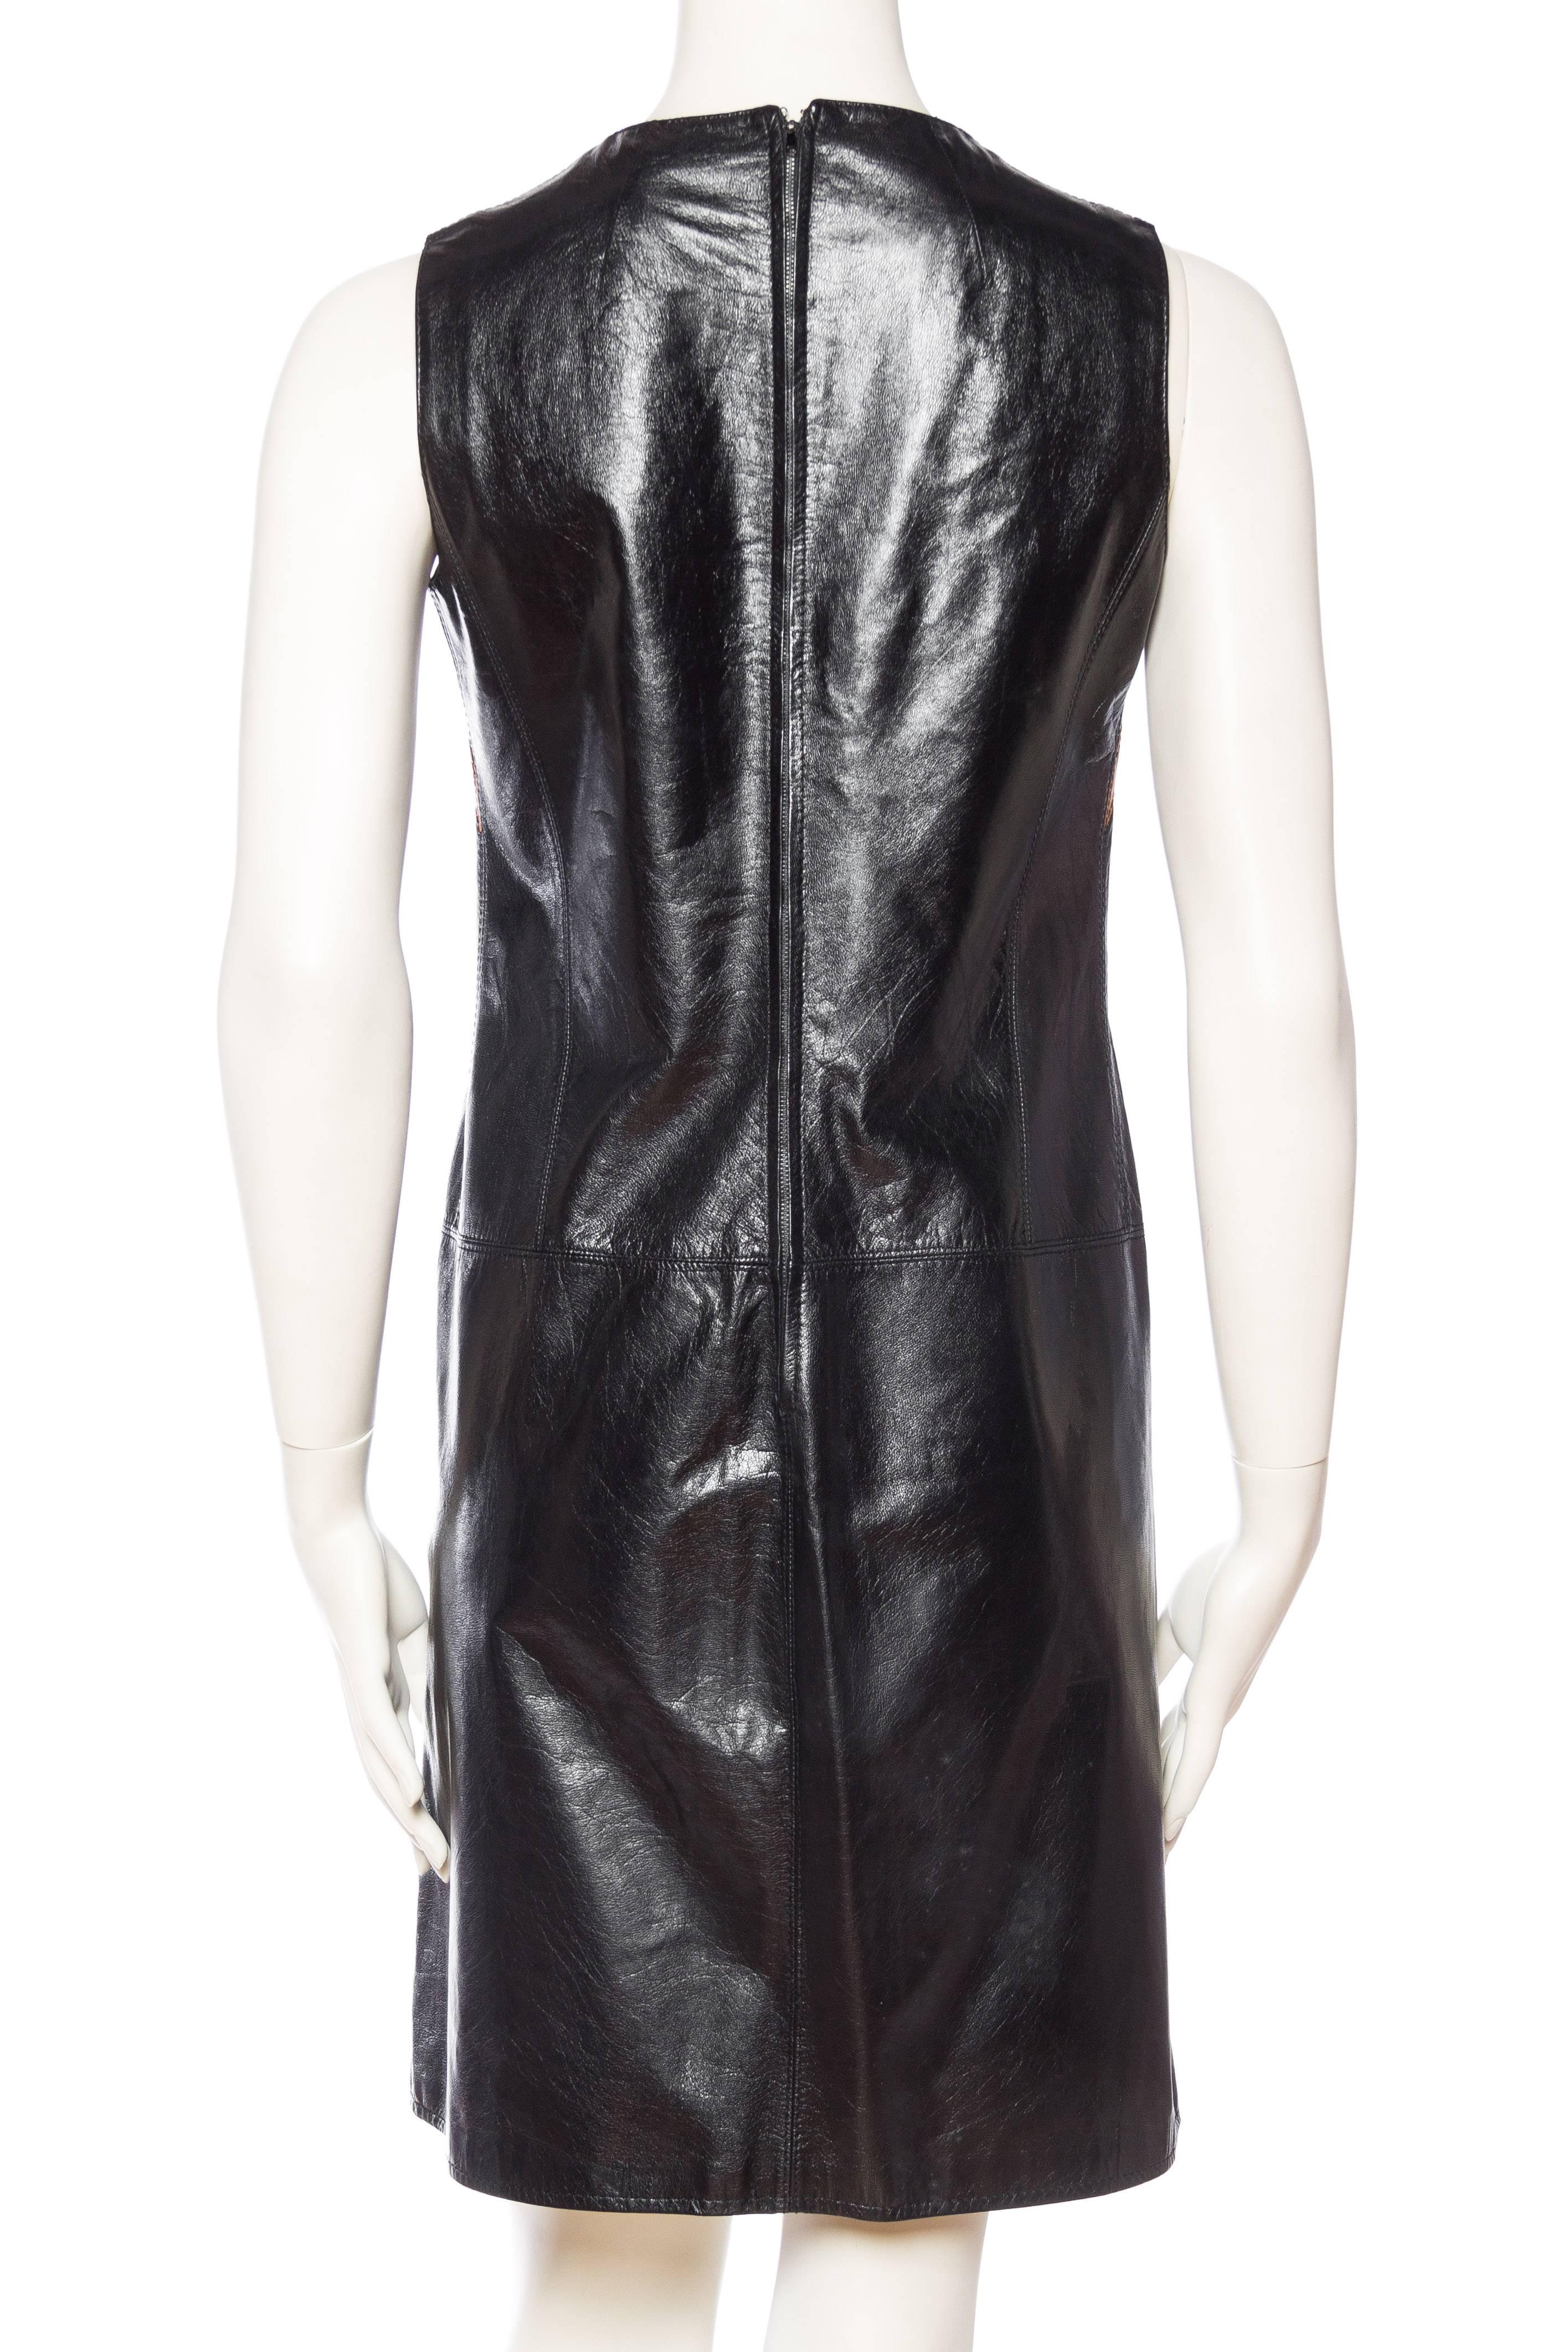 Women's 1960S Black & Brown Leather Mod Shift Dress From Italy